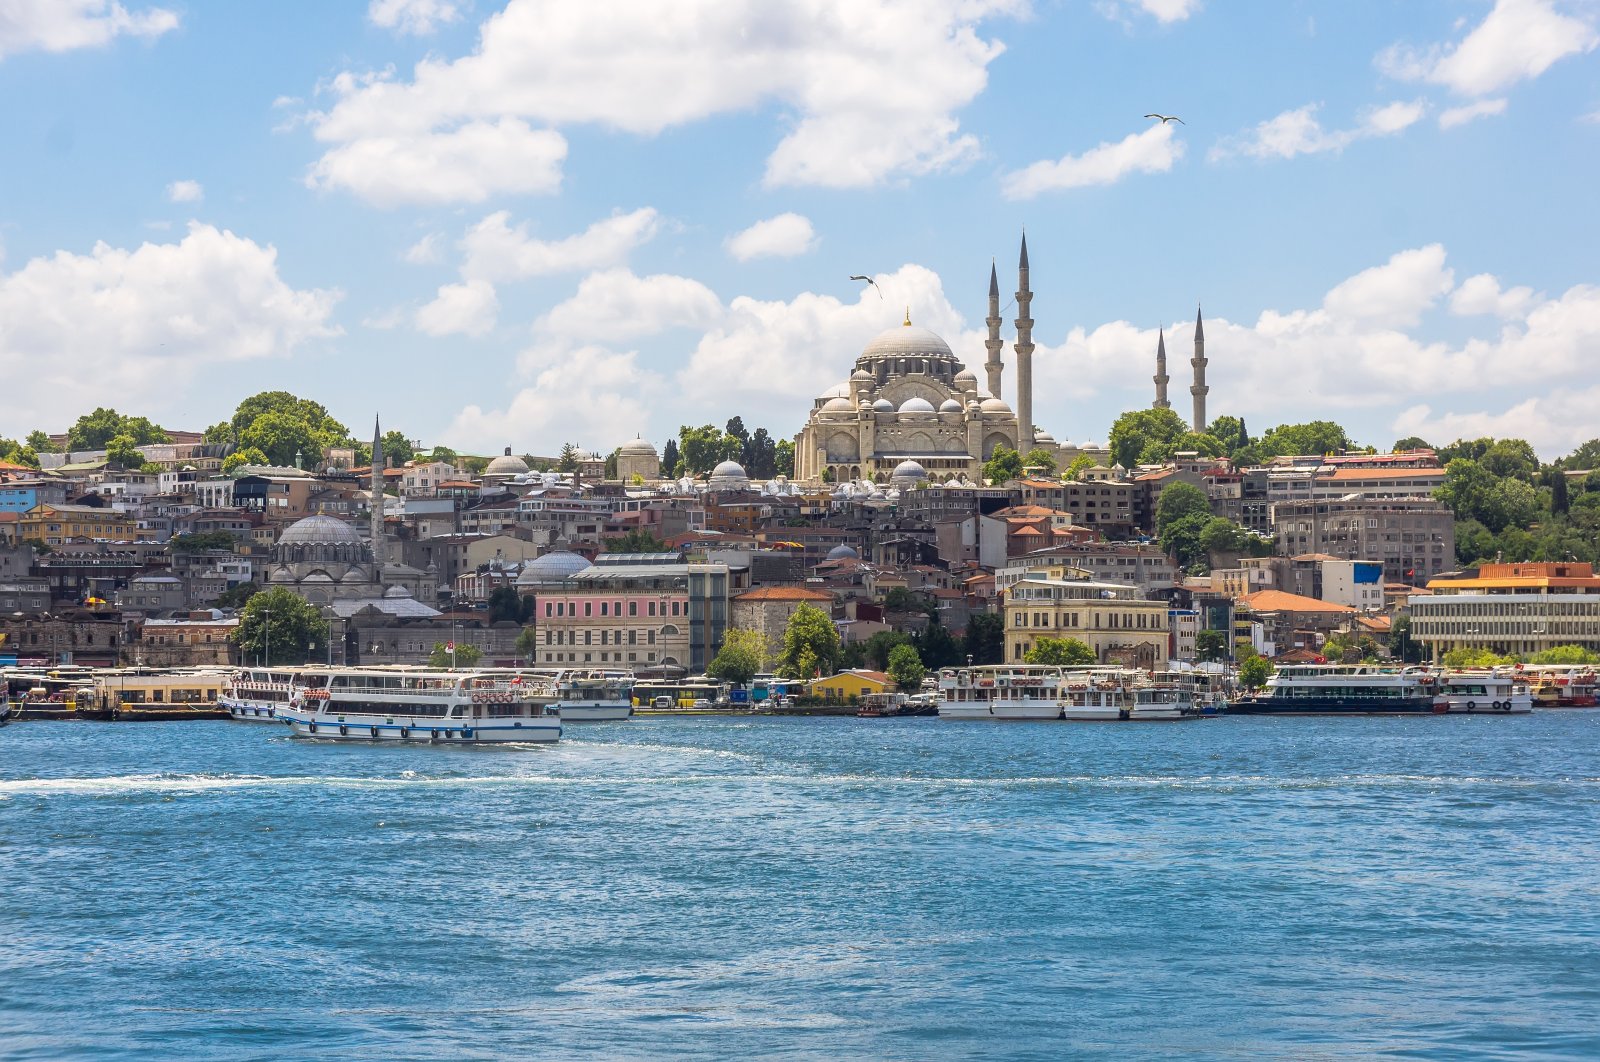 Seafront landscape of Istanbul's historic peninsula. (Shutterstock Photo)